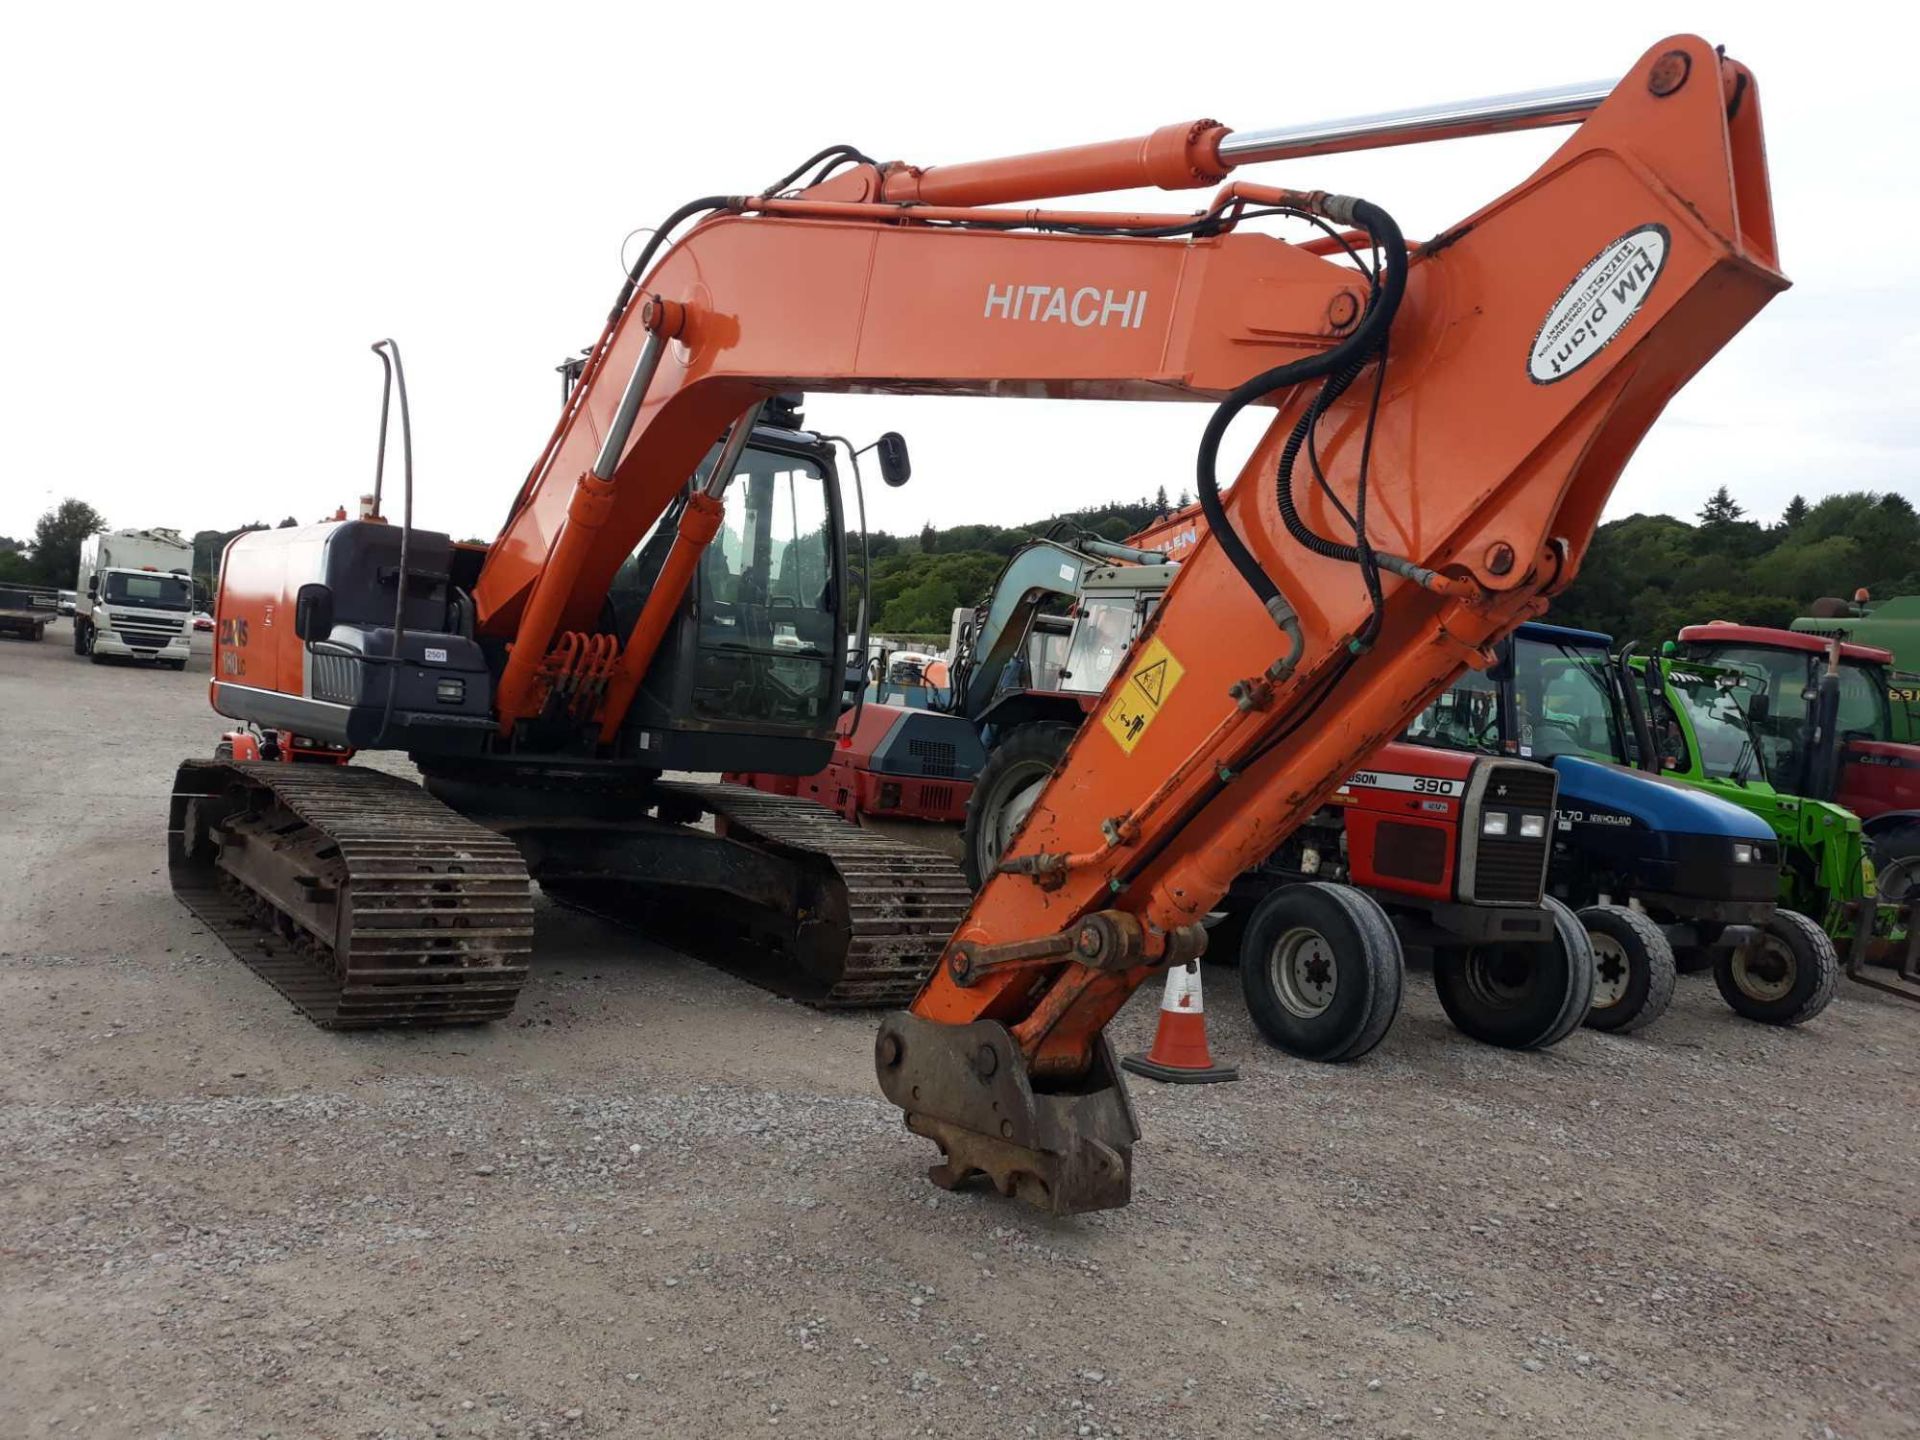 Hitachi ZX180LC-3 Excavator, Year 2008, 8140 hours displayed - not warranted, Key in PC, + VAT - Image 2 of 6